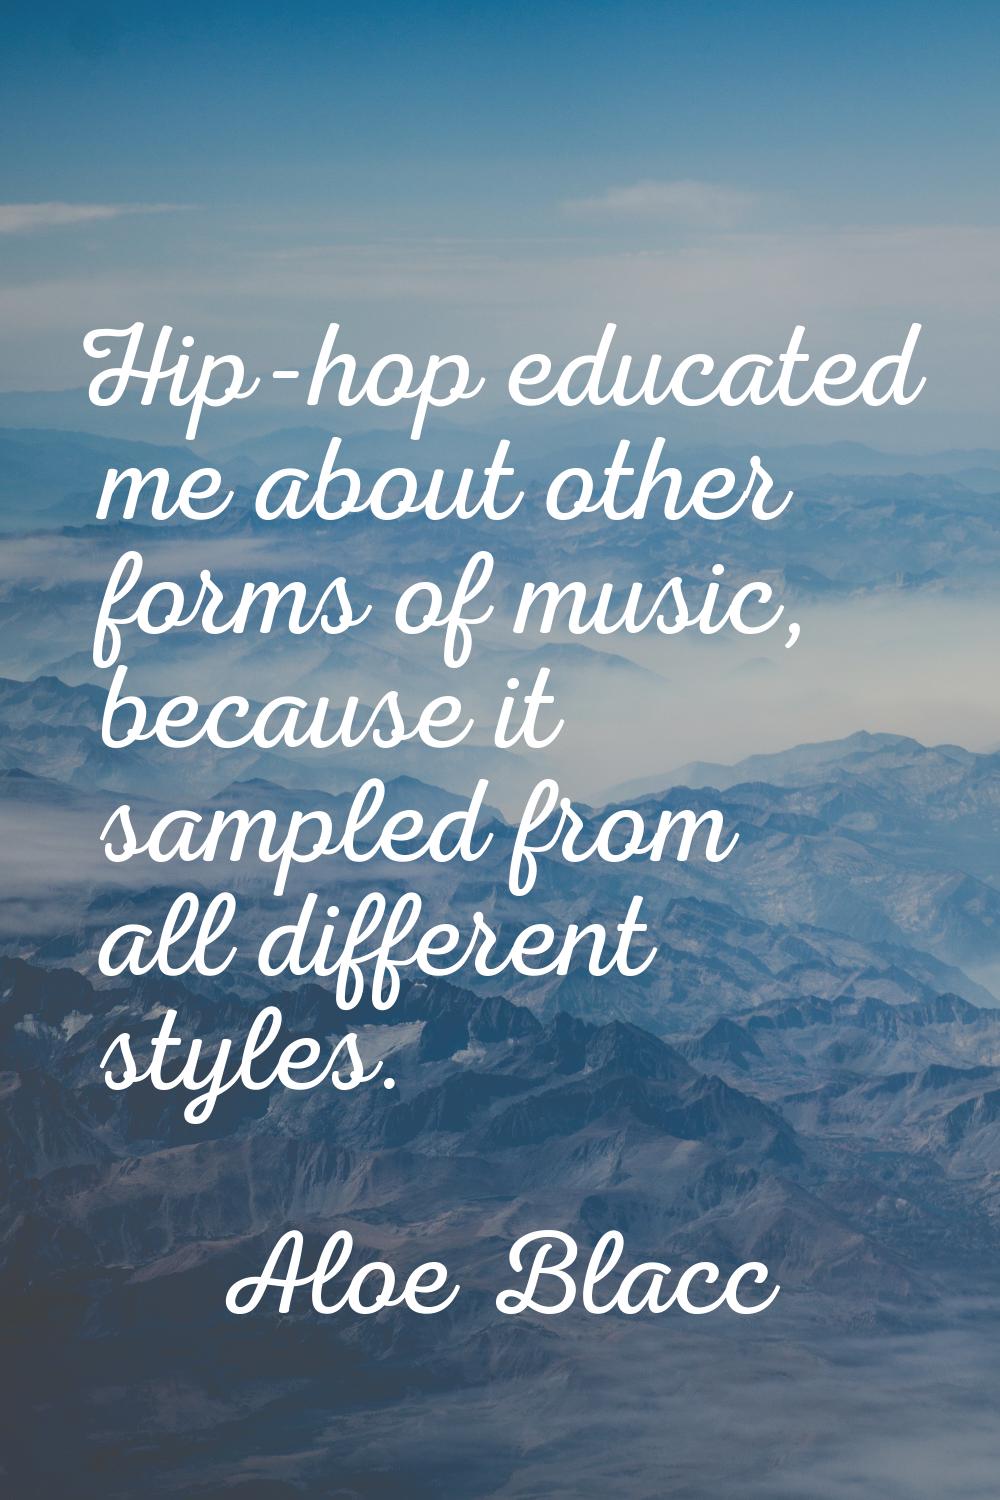 Hip-hop educated me about other forms of music, because it sampled from all different styles.